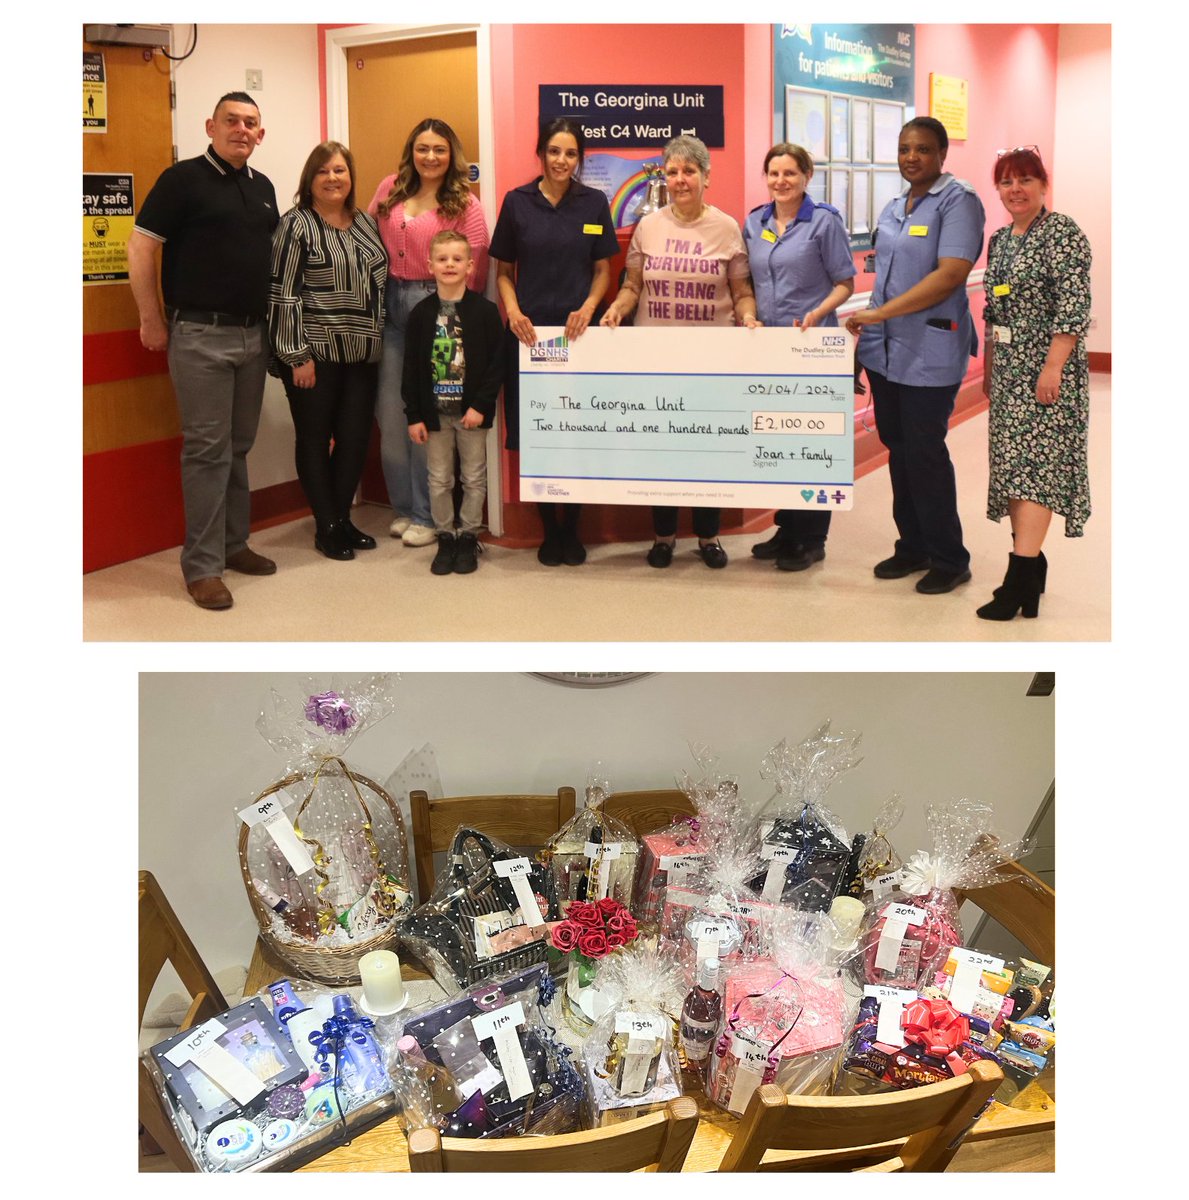 A big thank you to Joan Bowen & family for their generous donation for the @georgina_c4. They raised an amazing £2,100 by organising a raffle and donations from their just giving page to show their appreciation for the treatment & care given to Joan Bowen following her diagnosis.